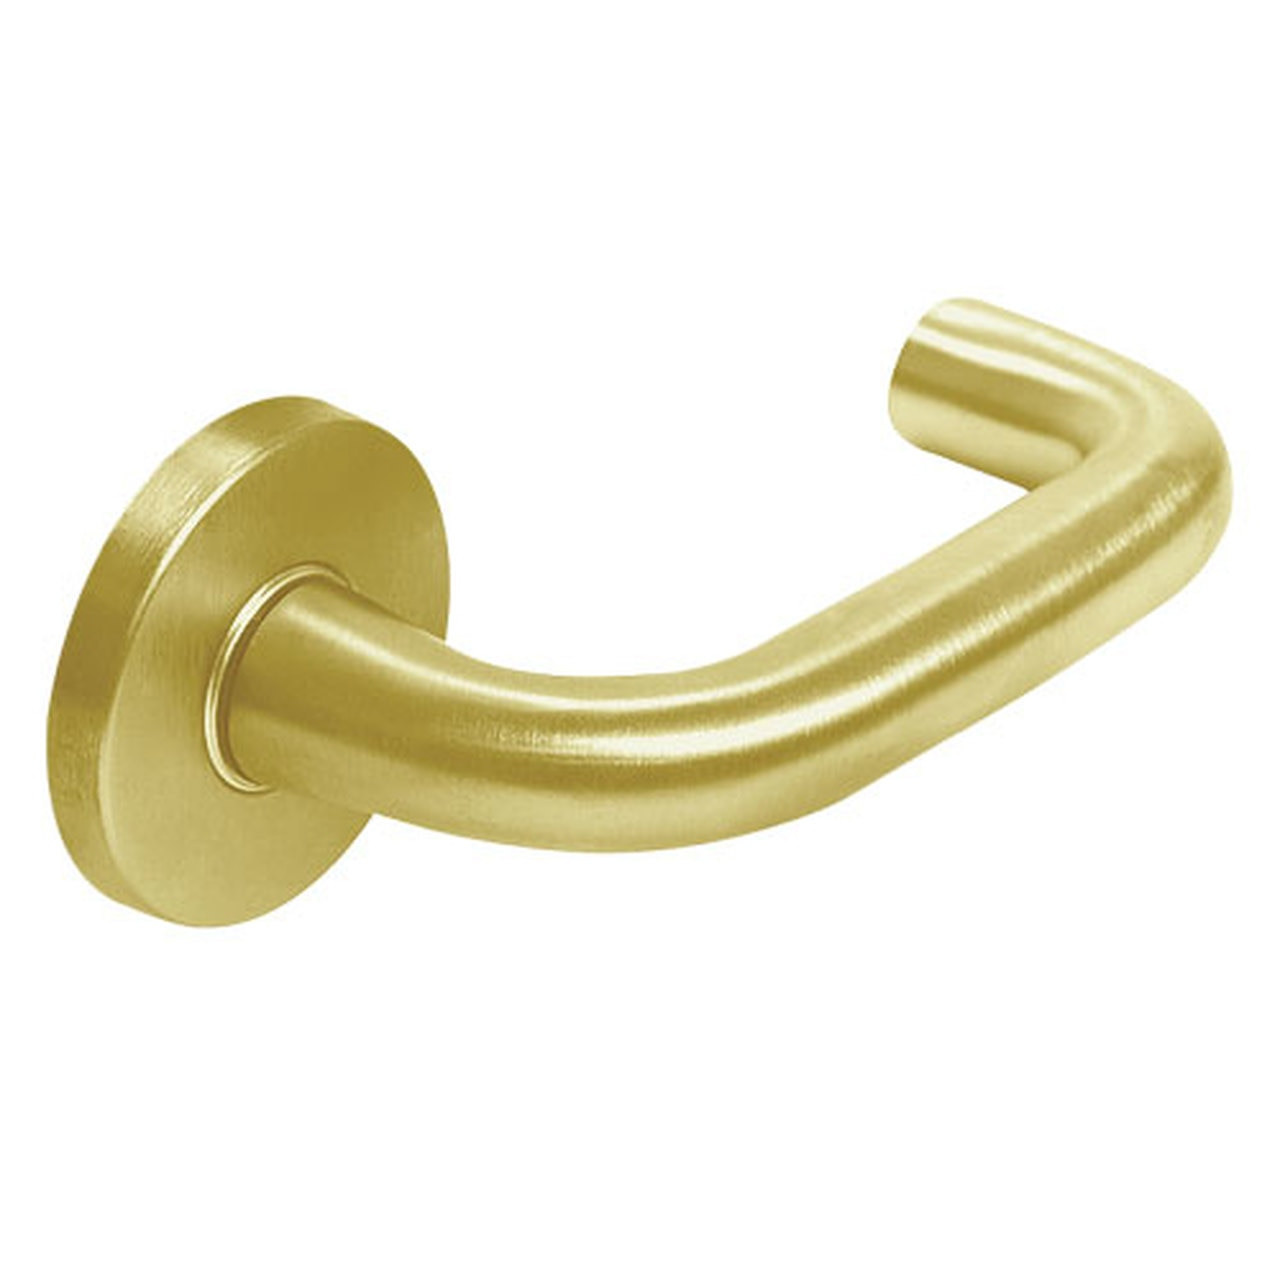 ML2054-LSA-606-M31 Corbin Russwin ML2000 Series Mortise Entrance Trim Pack with Lustra Lever in Satin Brass